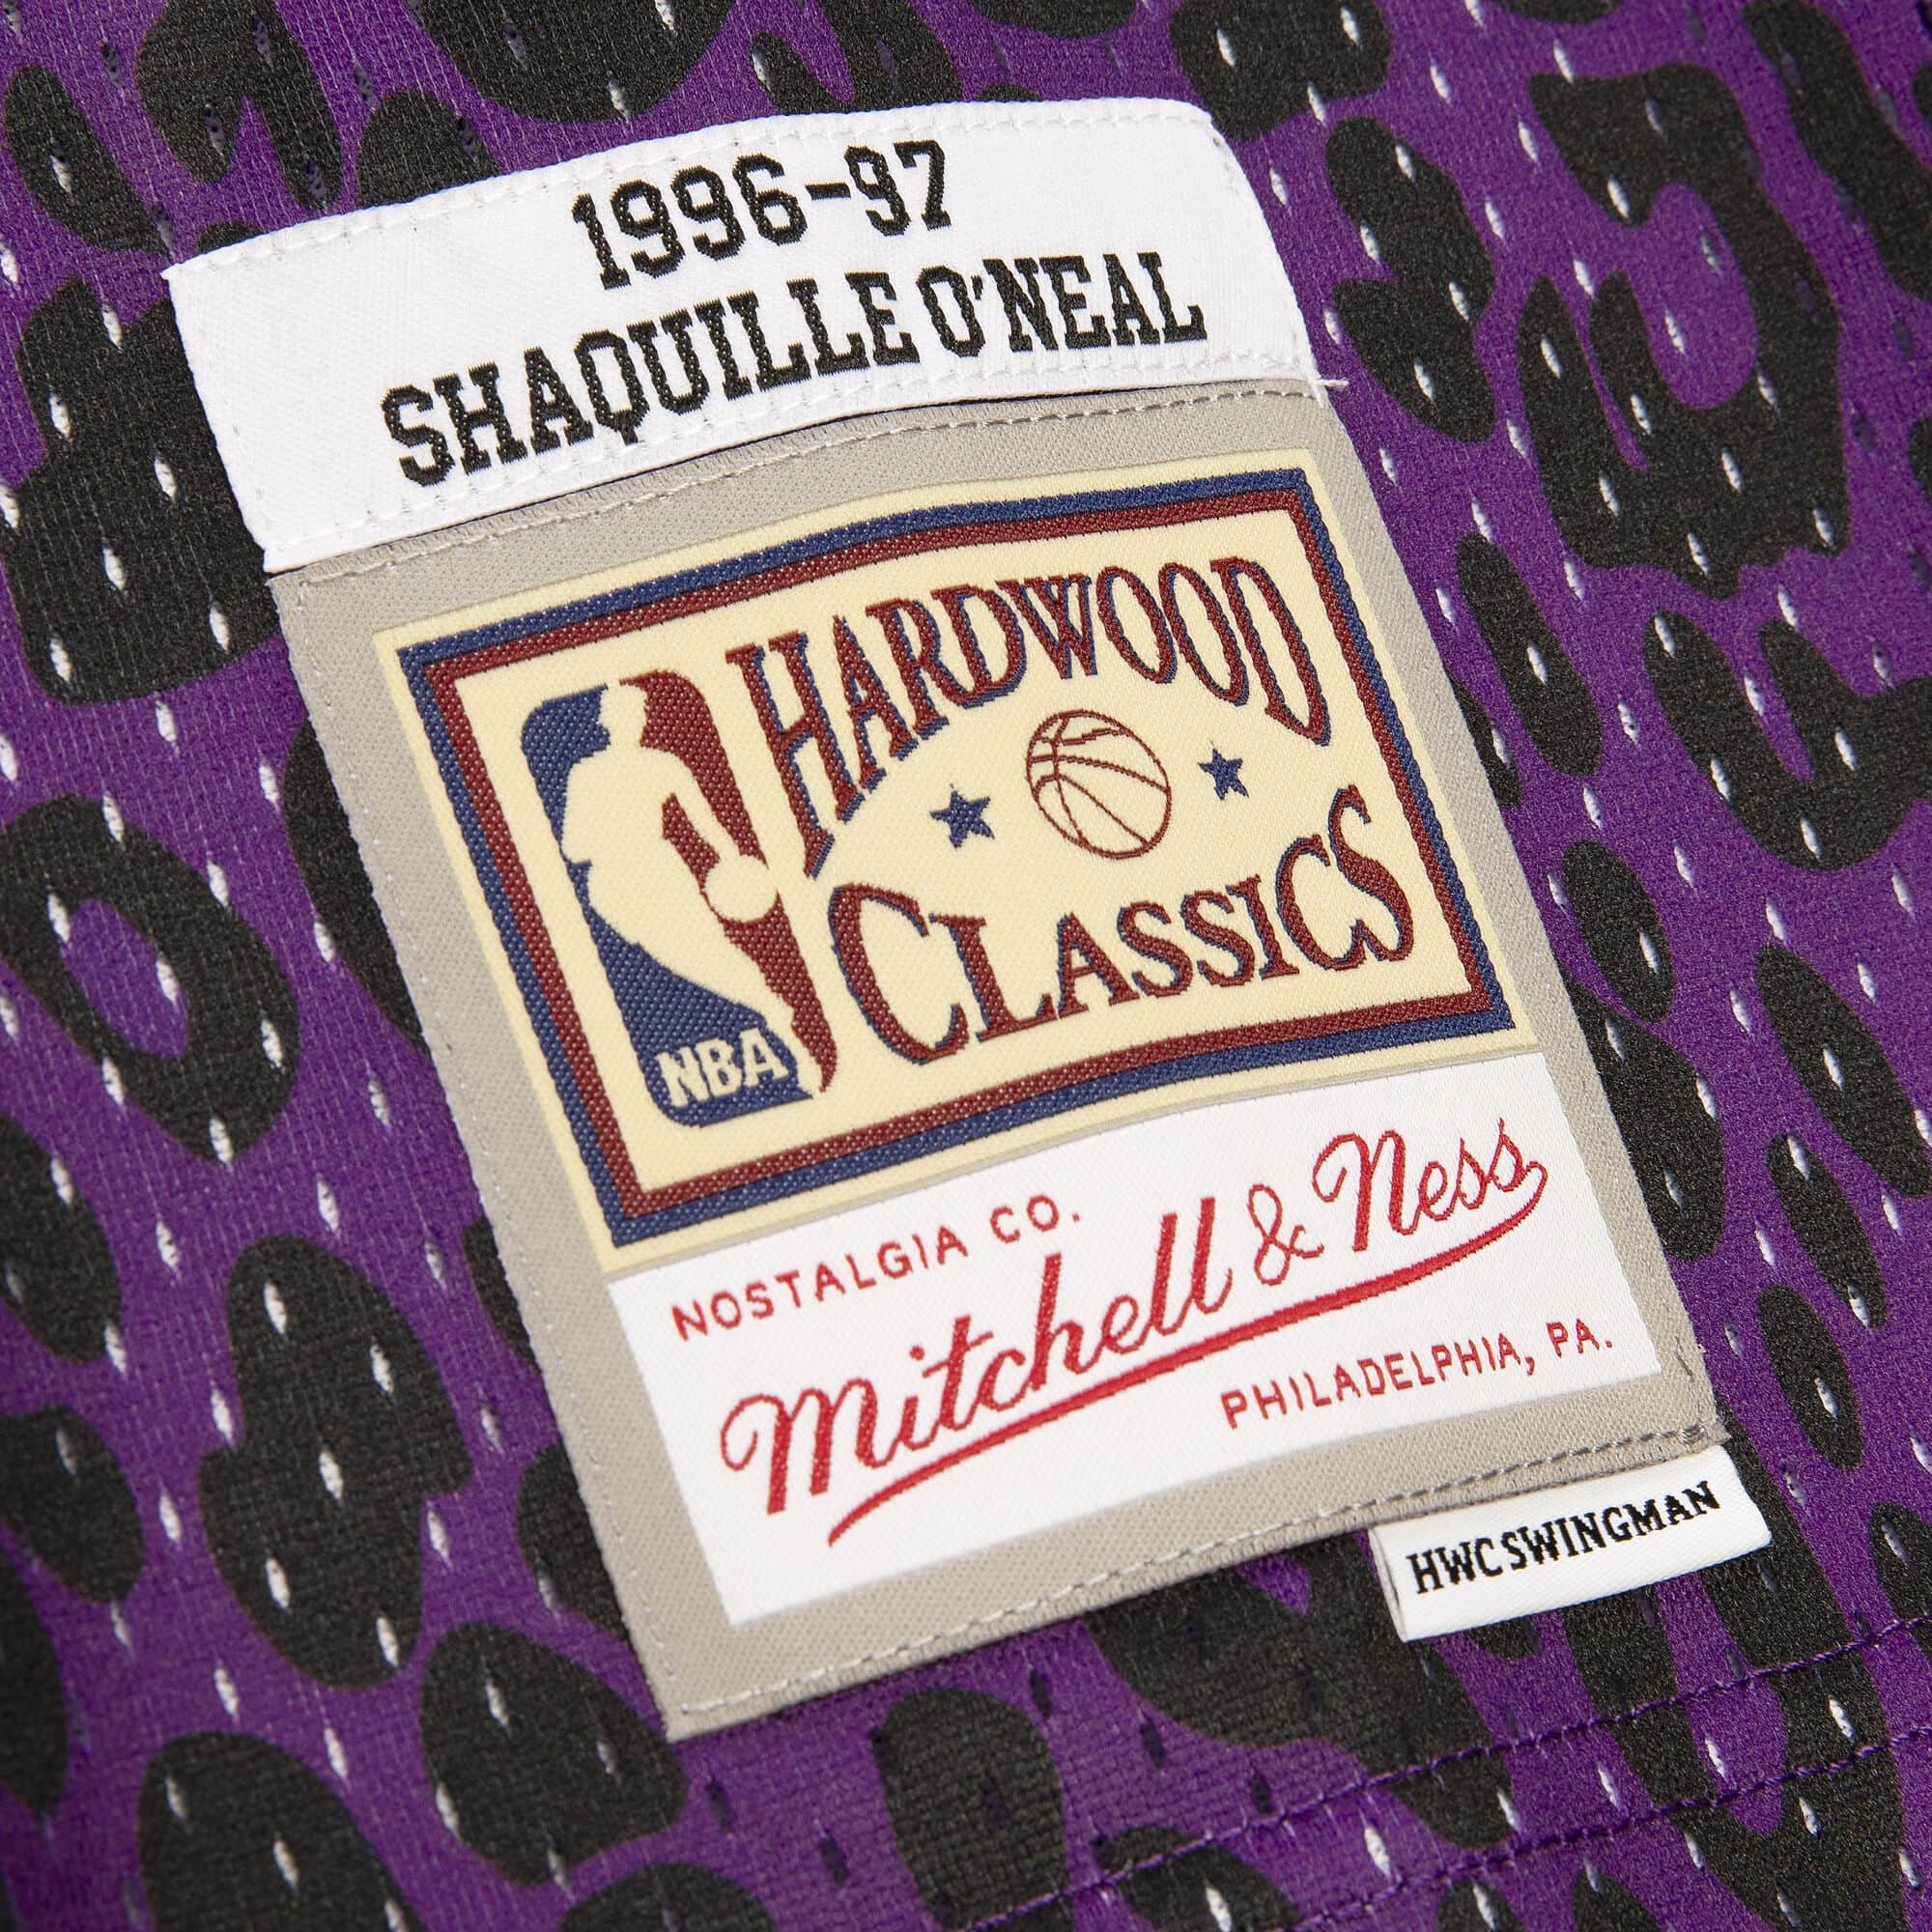 Mitchell & Ness Shaquille O'Neal Gold Los Angeles Lakers 2000 NBA Finals Hardwood Classics Authentic